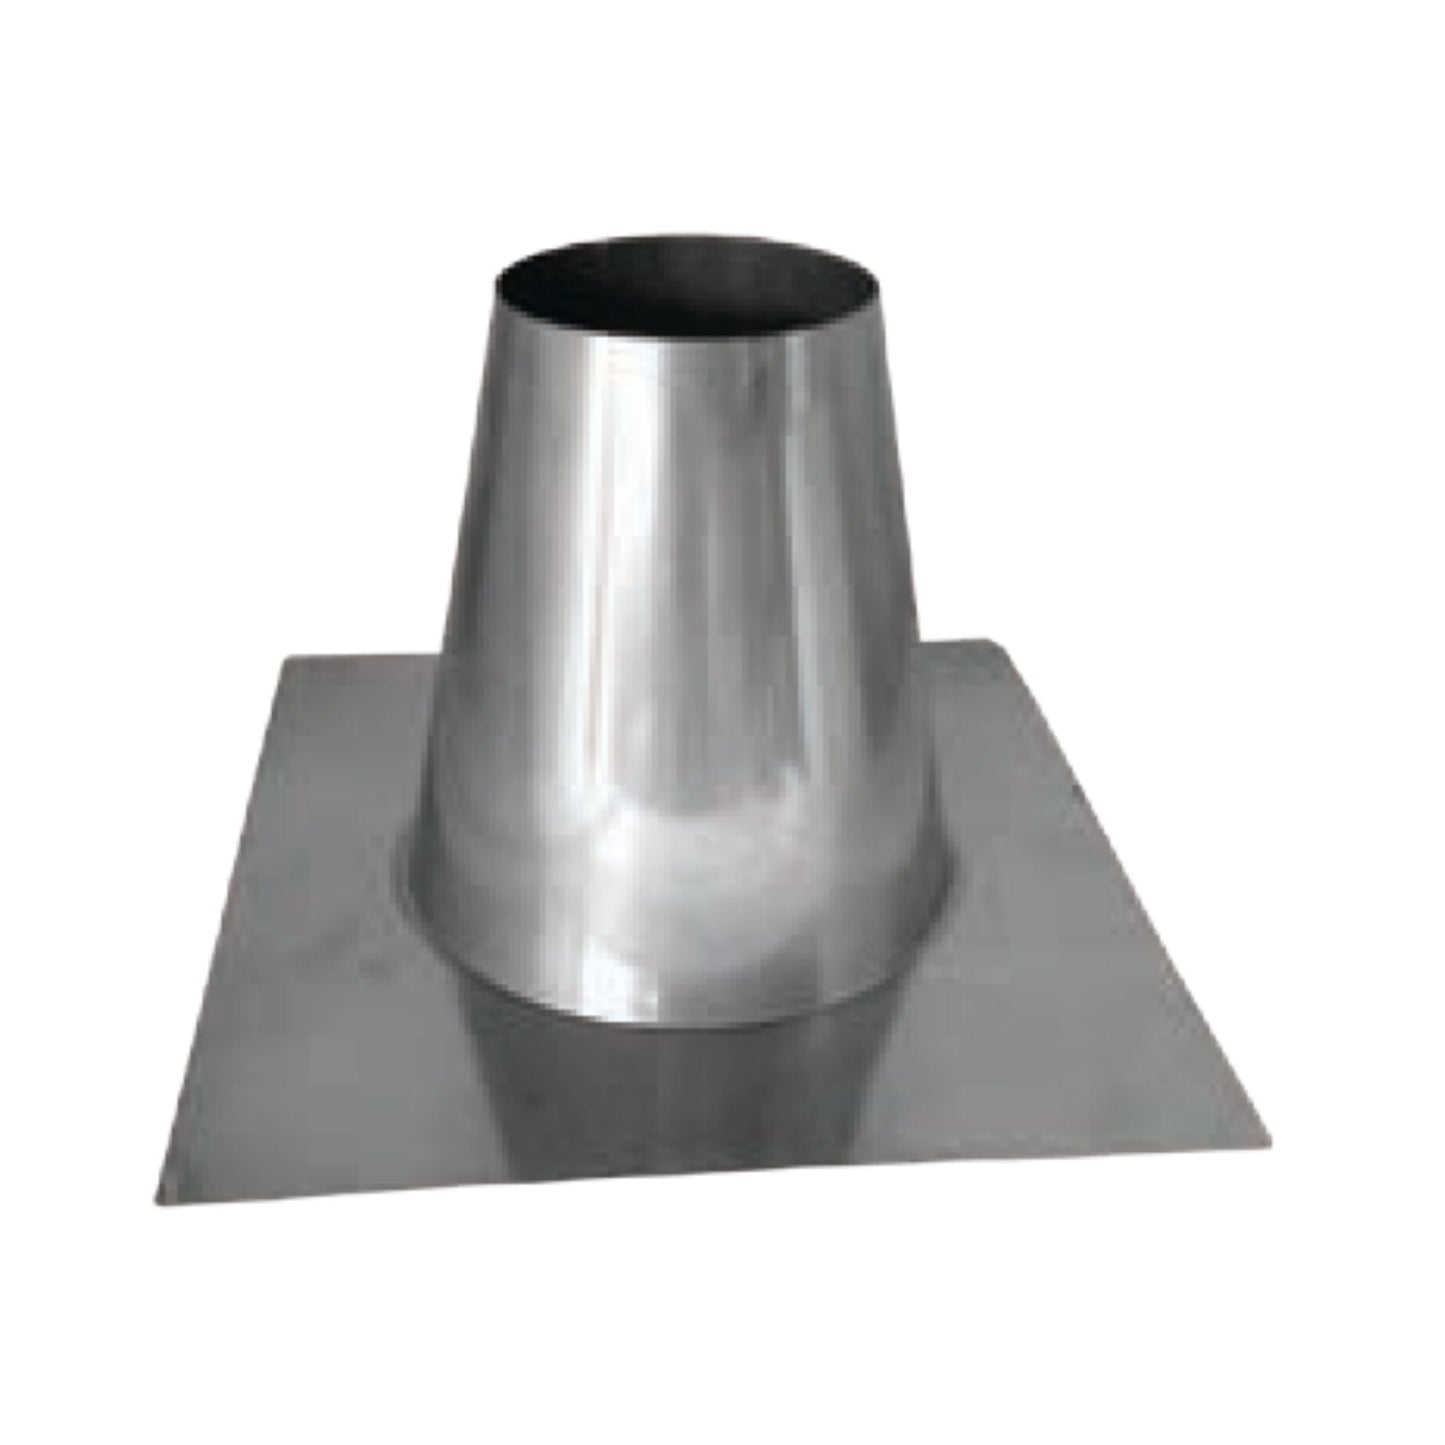 DuraVent FasNSeal 4" 29-4C Stainless Steel Tall Cone Flashing